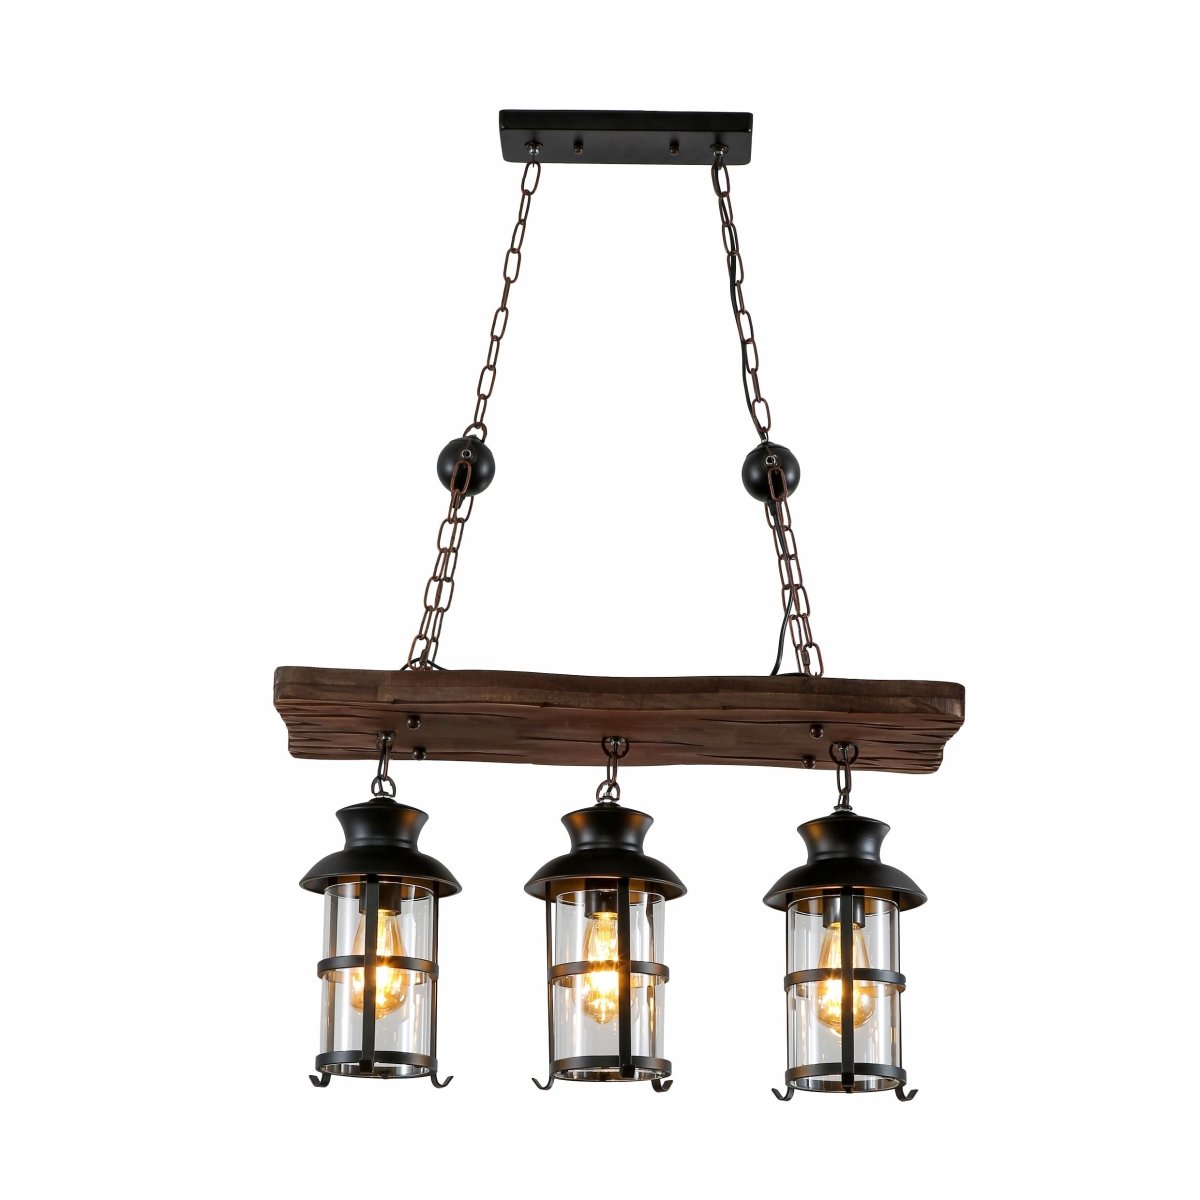 Main image of Board Iron and Wood Glass Cylinder Shade Island Chandelier Light 3xE27 | TEKLED 159-17840